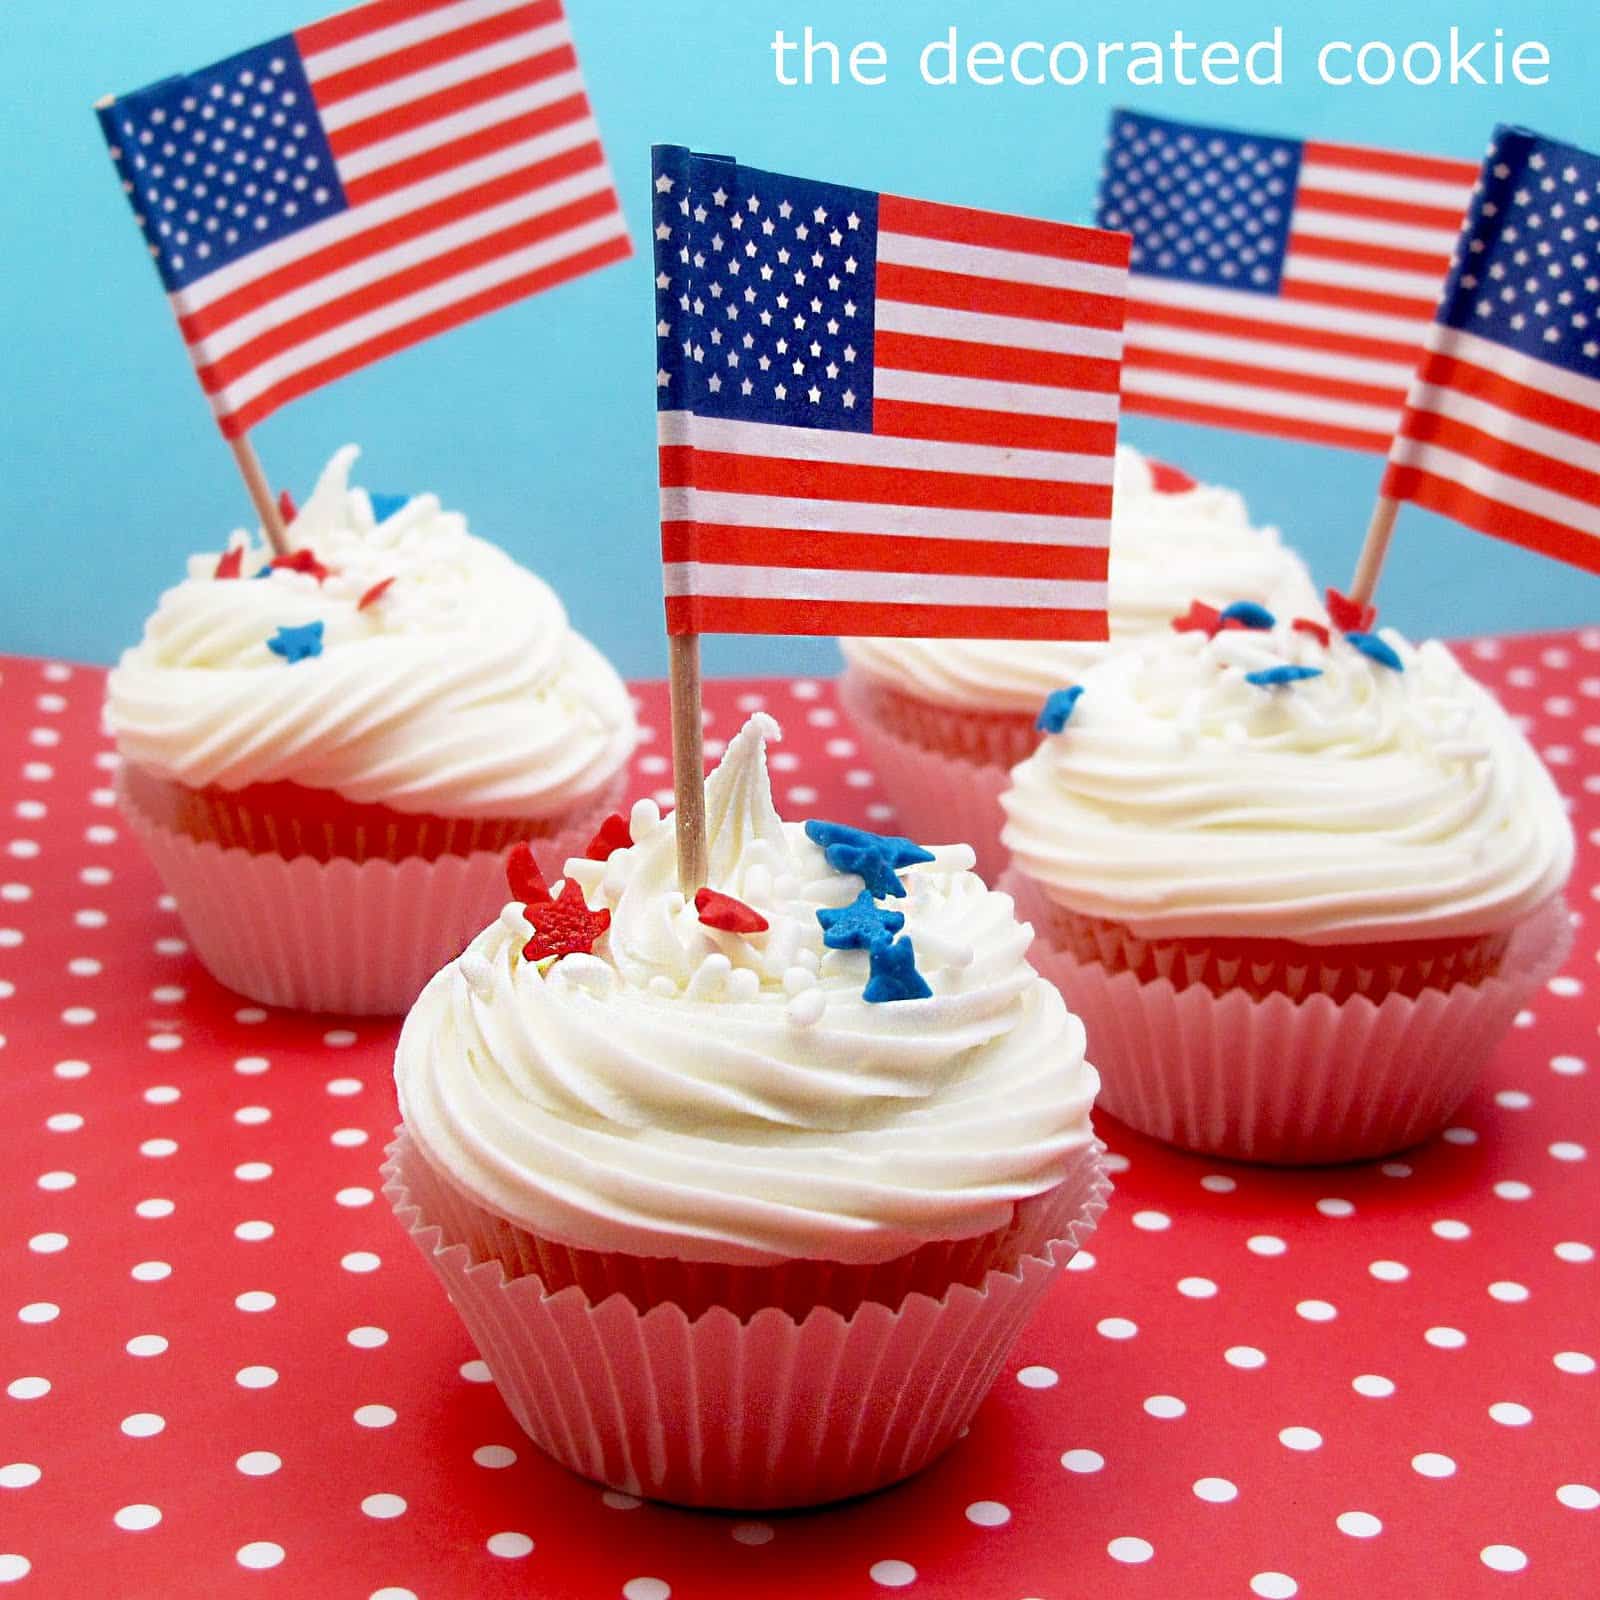 4th of July cupcakes - the decorated cookie